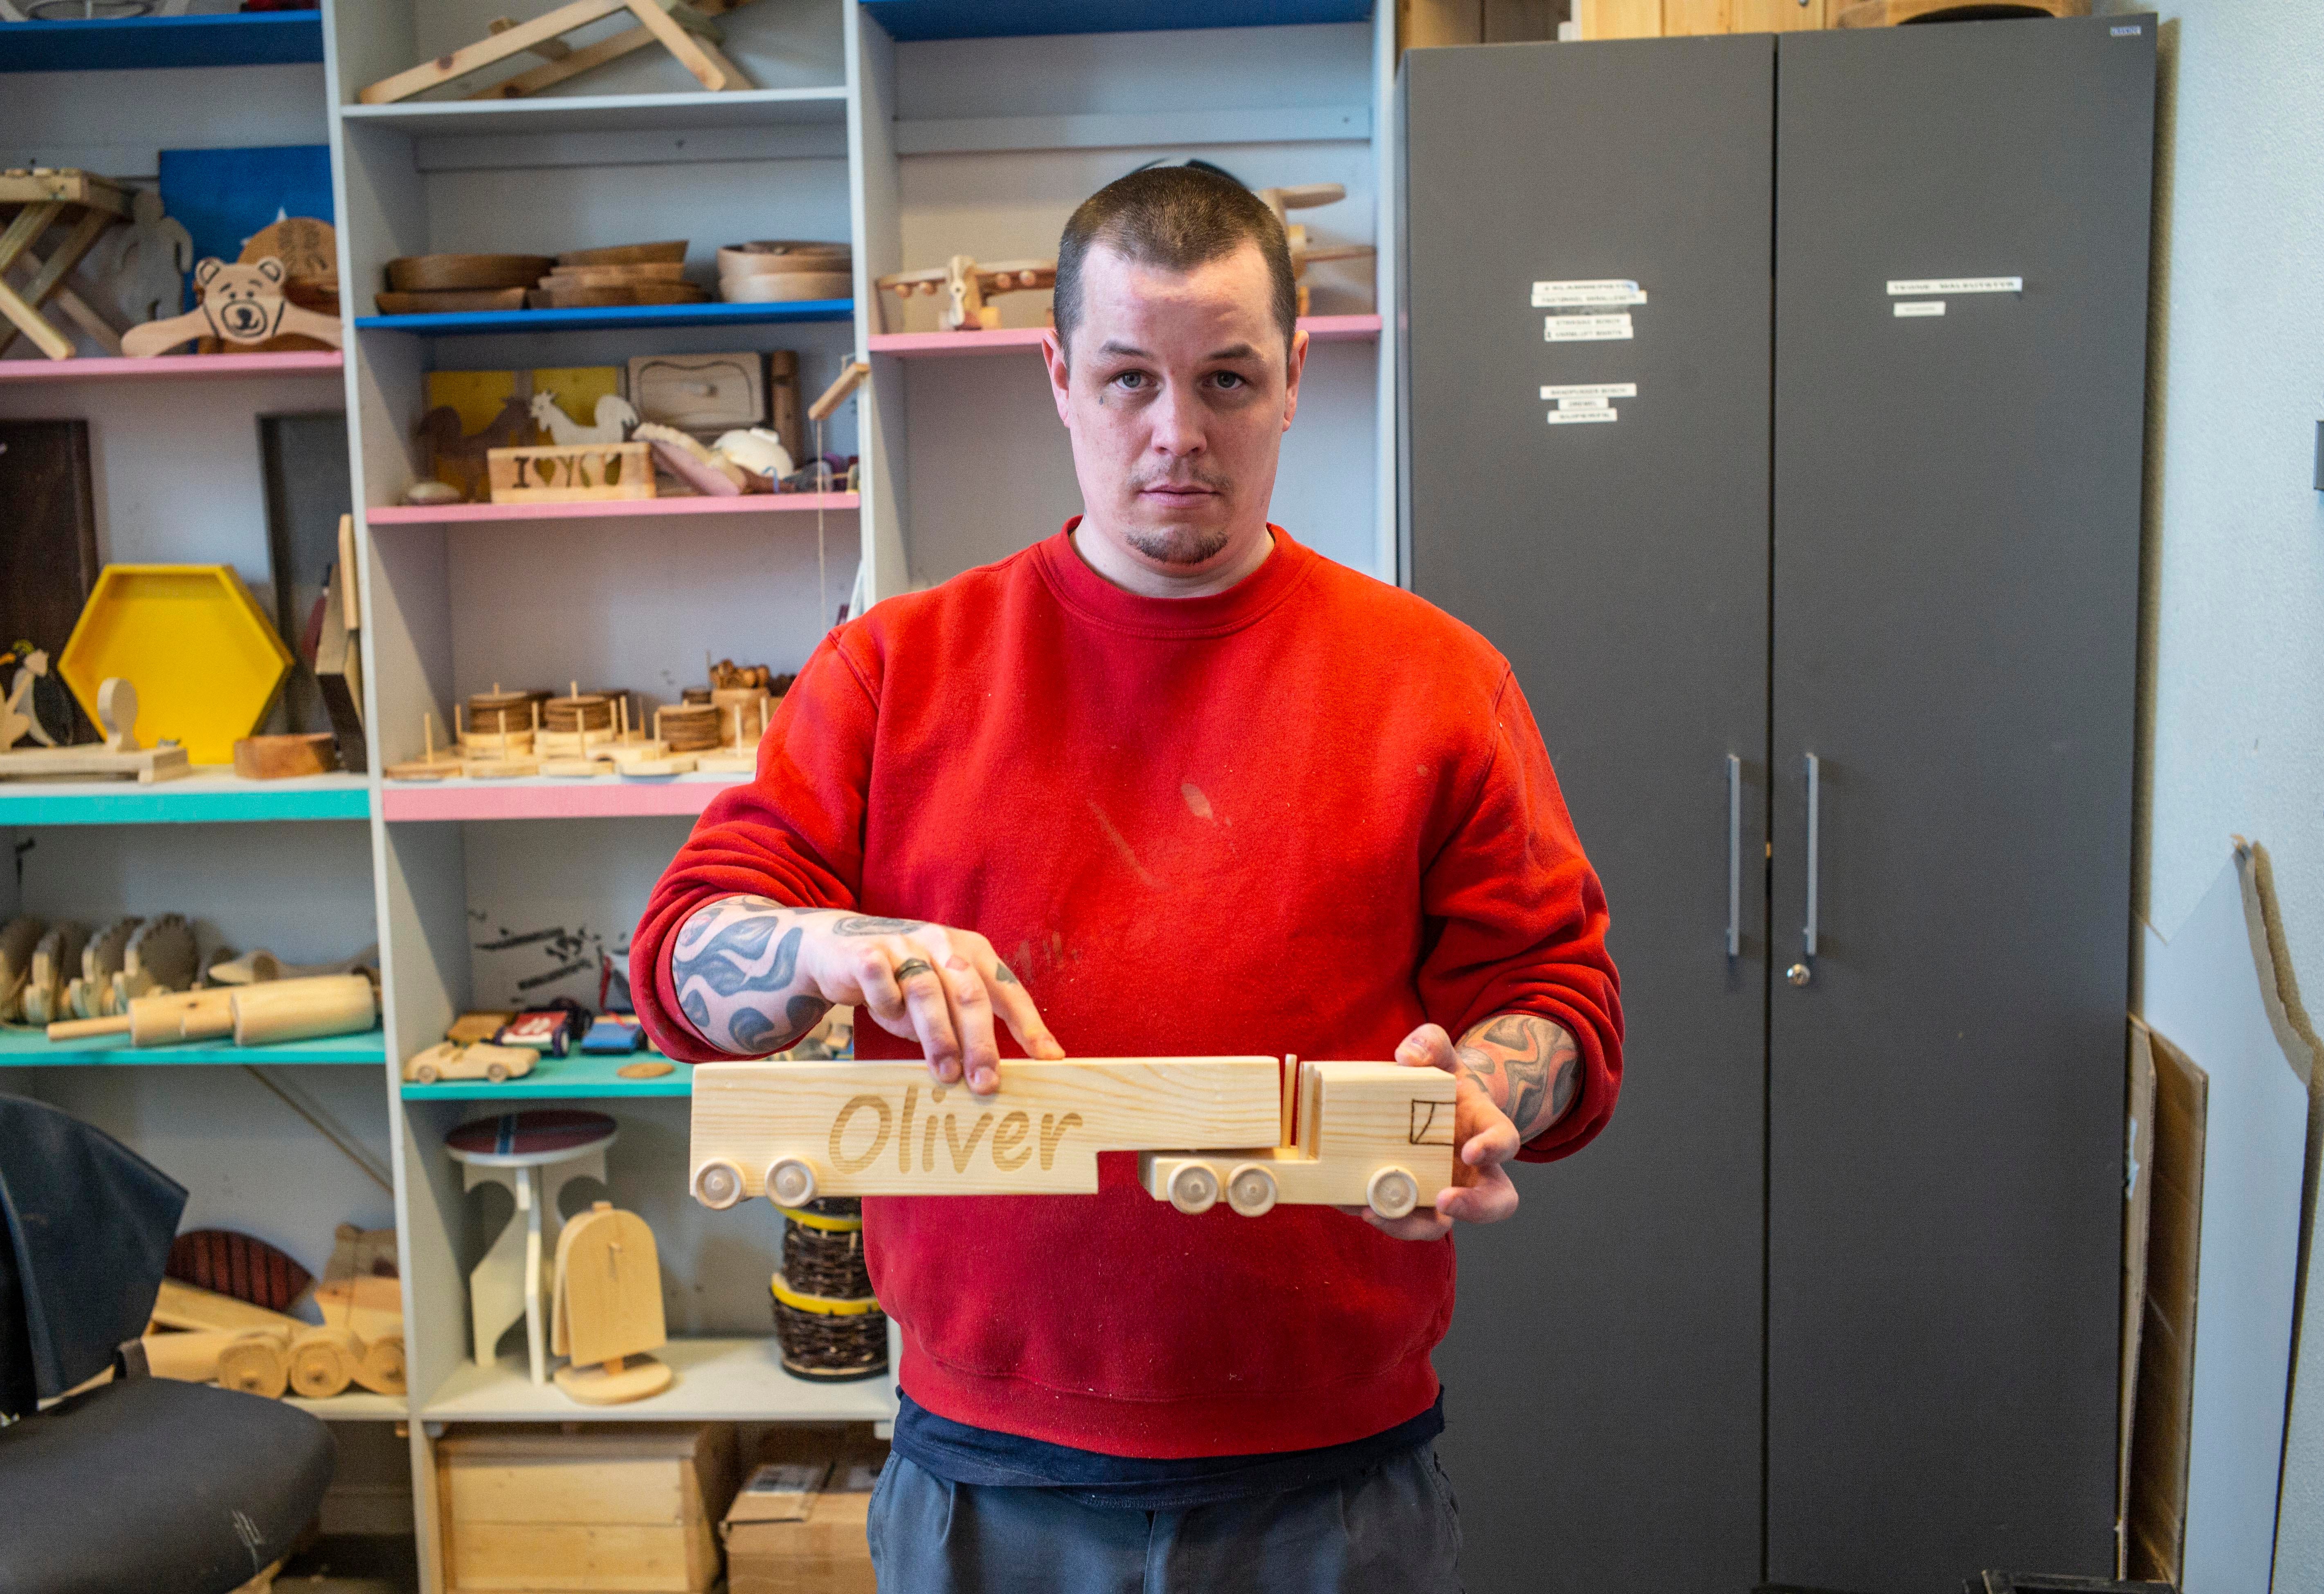 Thomas, who didn't give his last name, is pictured in the wood shop at Halden Prison in Norway, where inmates are allowed to work with hammers, saws and other tools banned in American prisons.  He'll leave soon to serve the remainder of his sentence at a halfway house, where he'll be allowed to hold a job and visit his family at home.